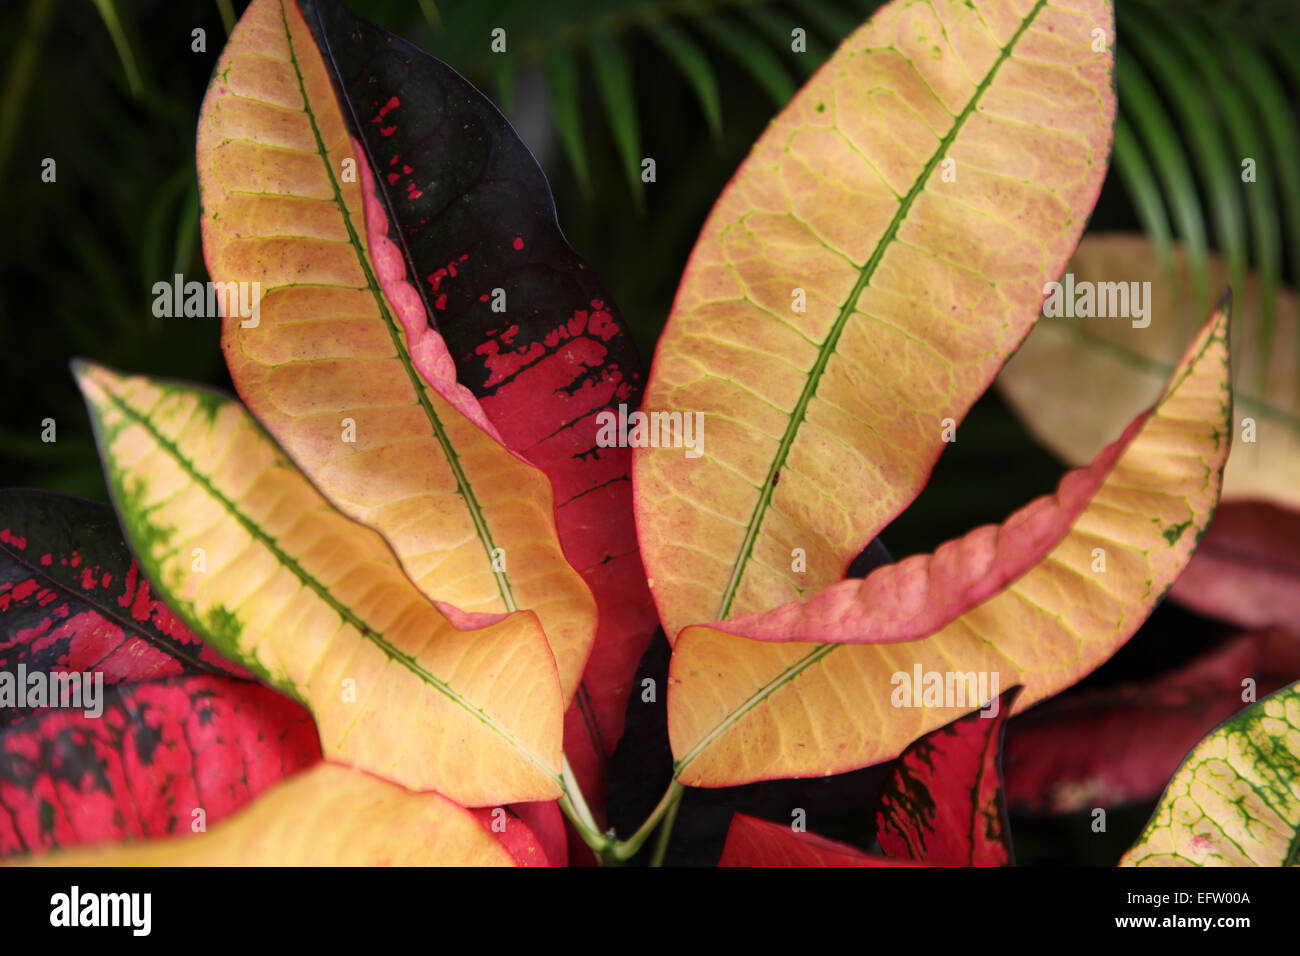 A colorful, Caribbean shrub with leaves of many colors including cream, pink, red, black, yellow and green Stock Photo